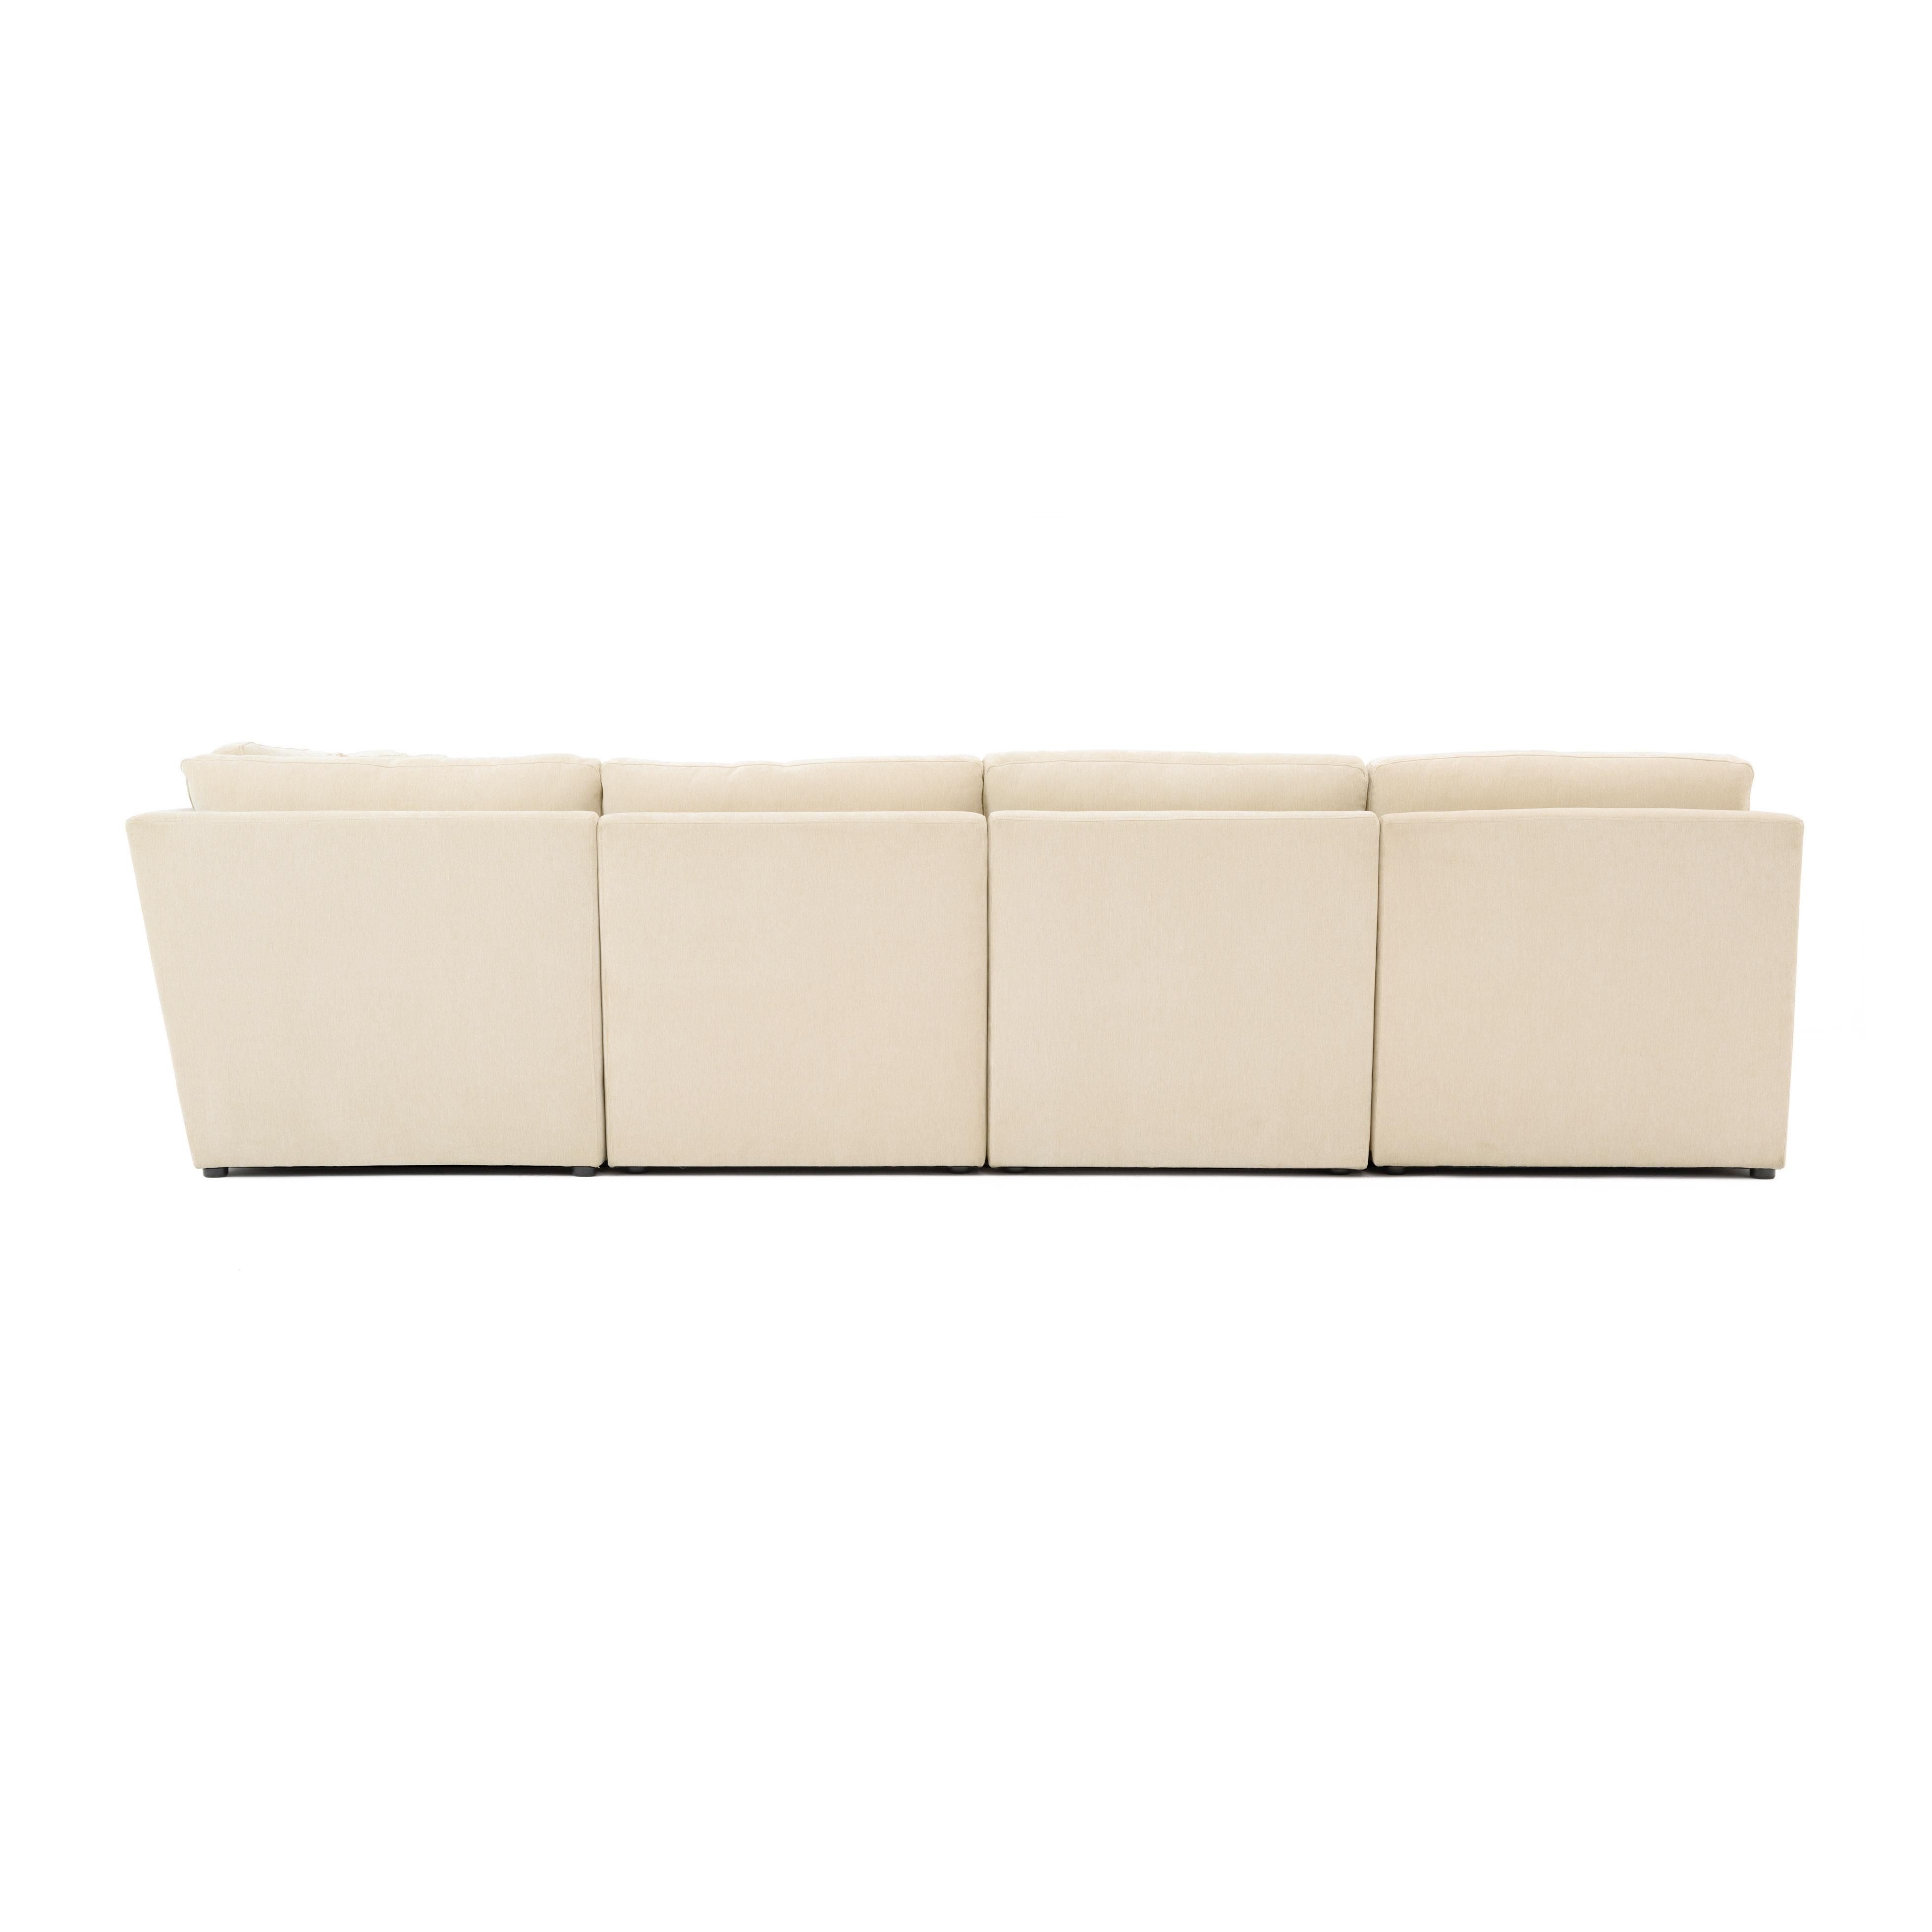 Aiden Beige Modular Large Chaise Sectional - Image 2